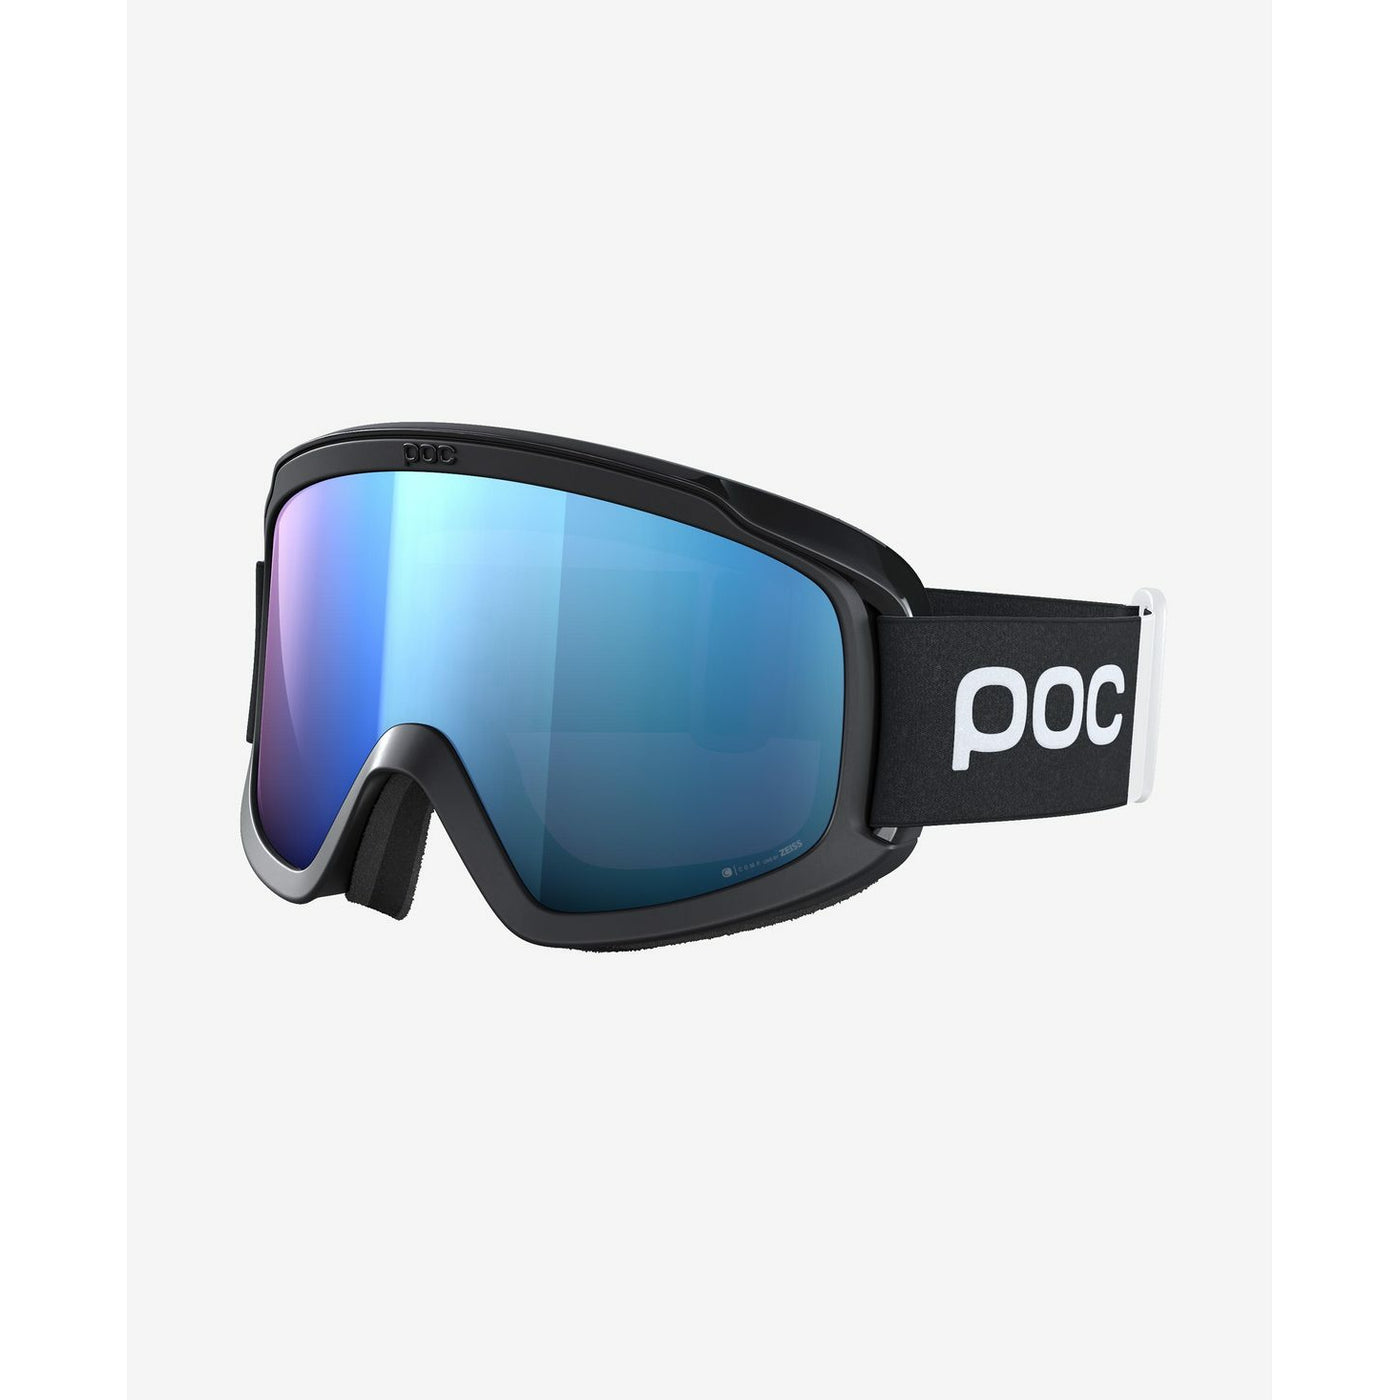 POC Opsin Clarity Comp